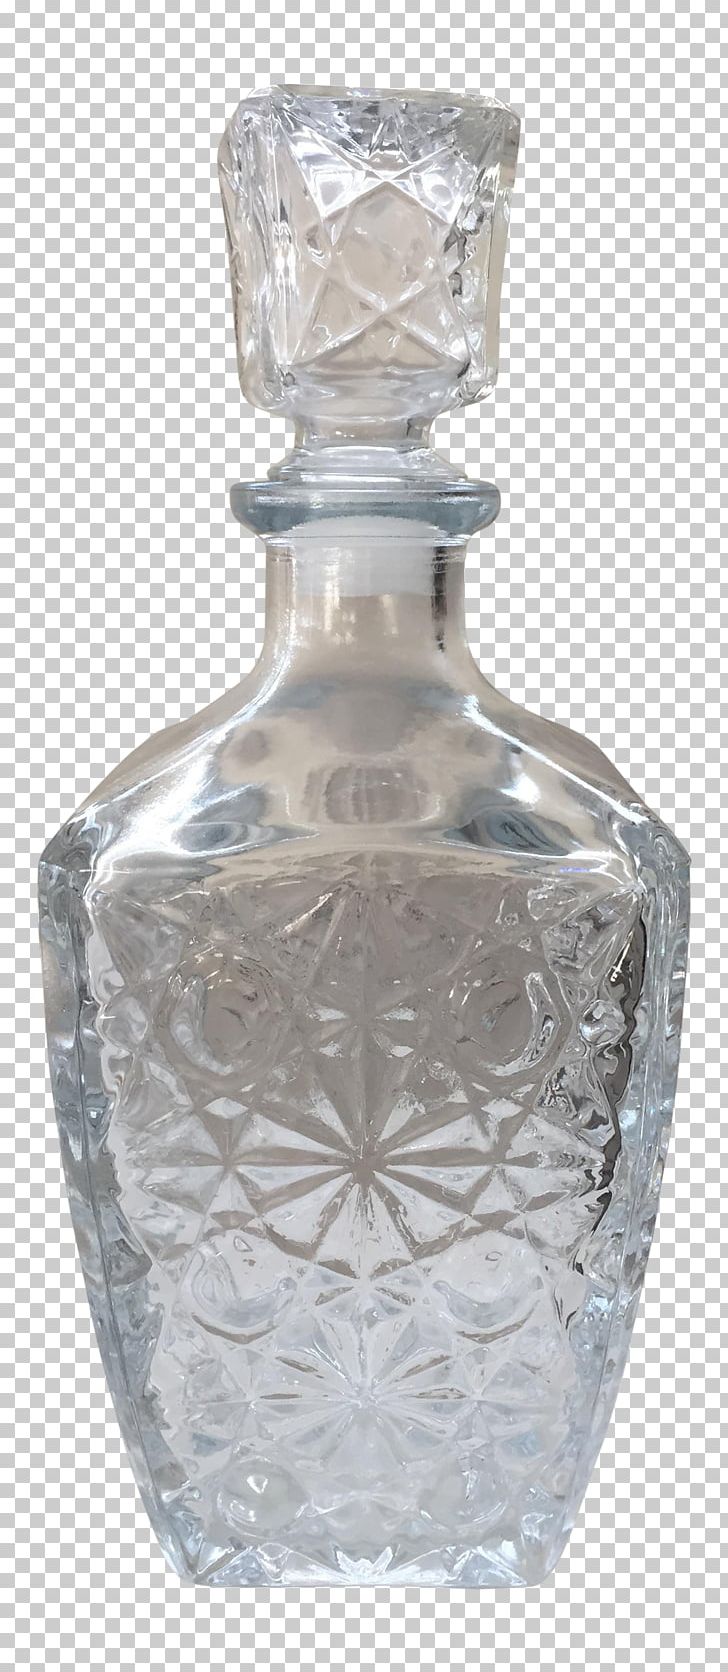 Glass Bottle Decanter Unbreakable PNG, Clipart, Barware, Bottle, Crystal, Decanter, Drinkware Free PNG Download